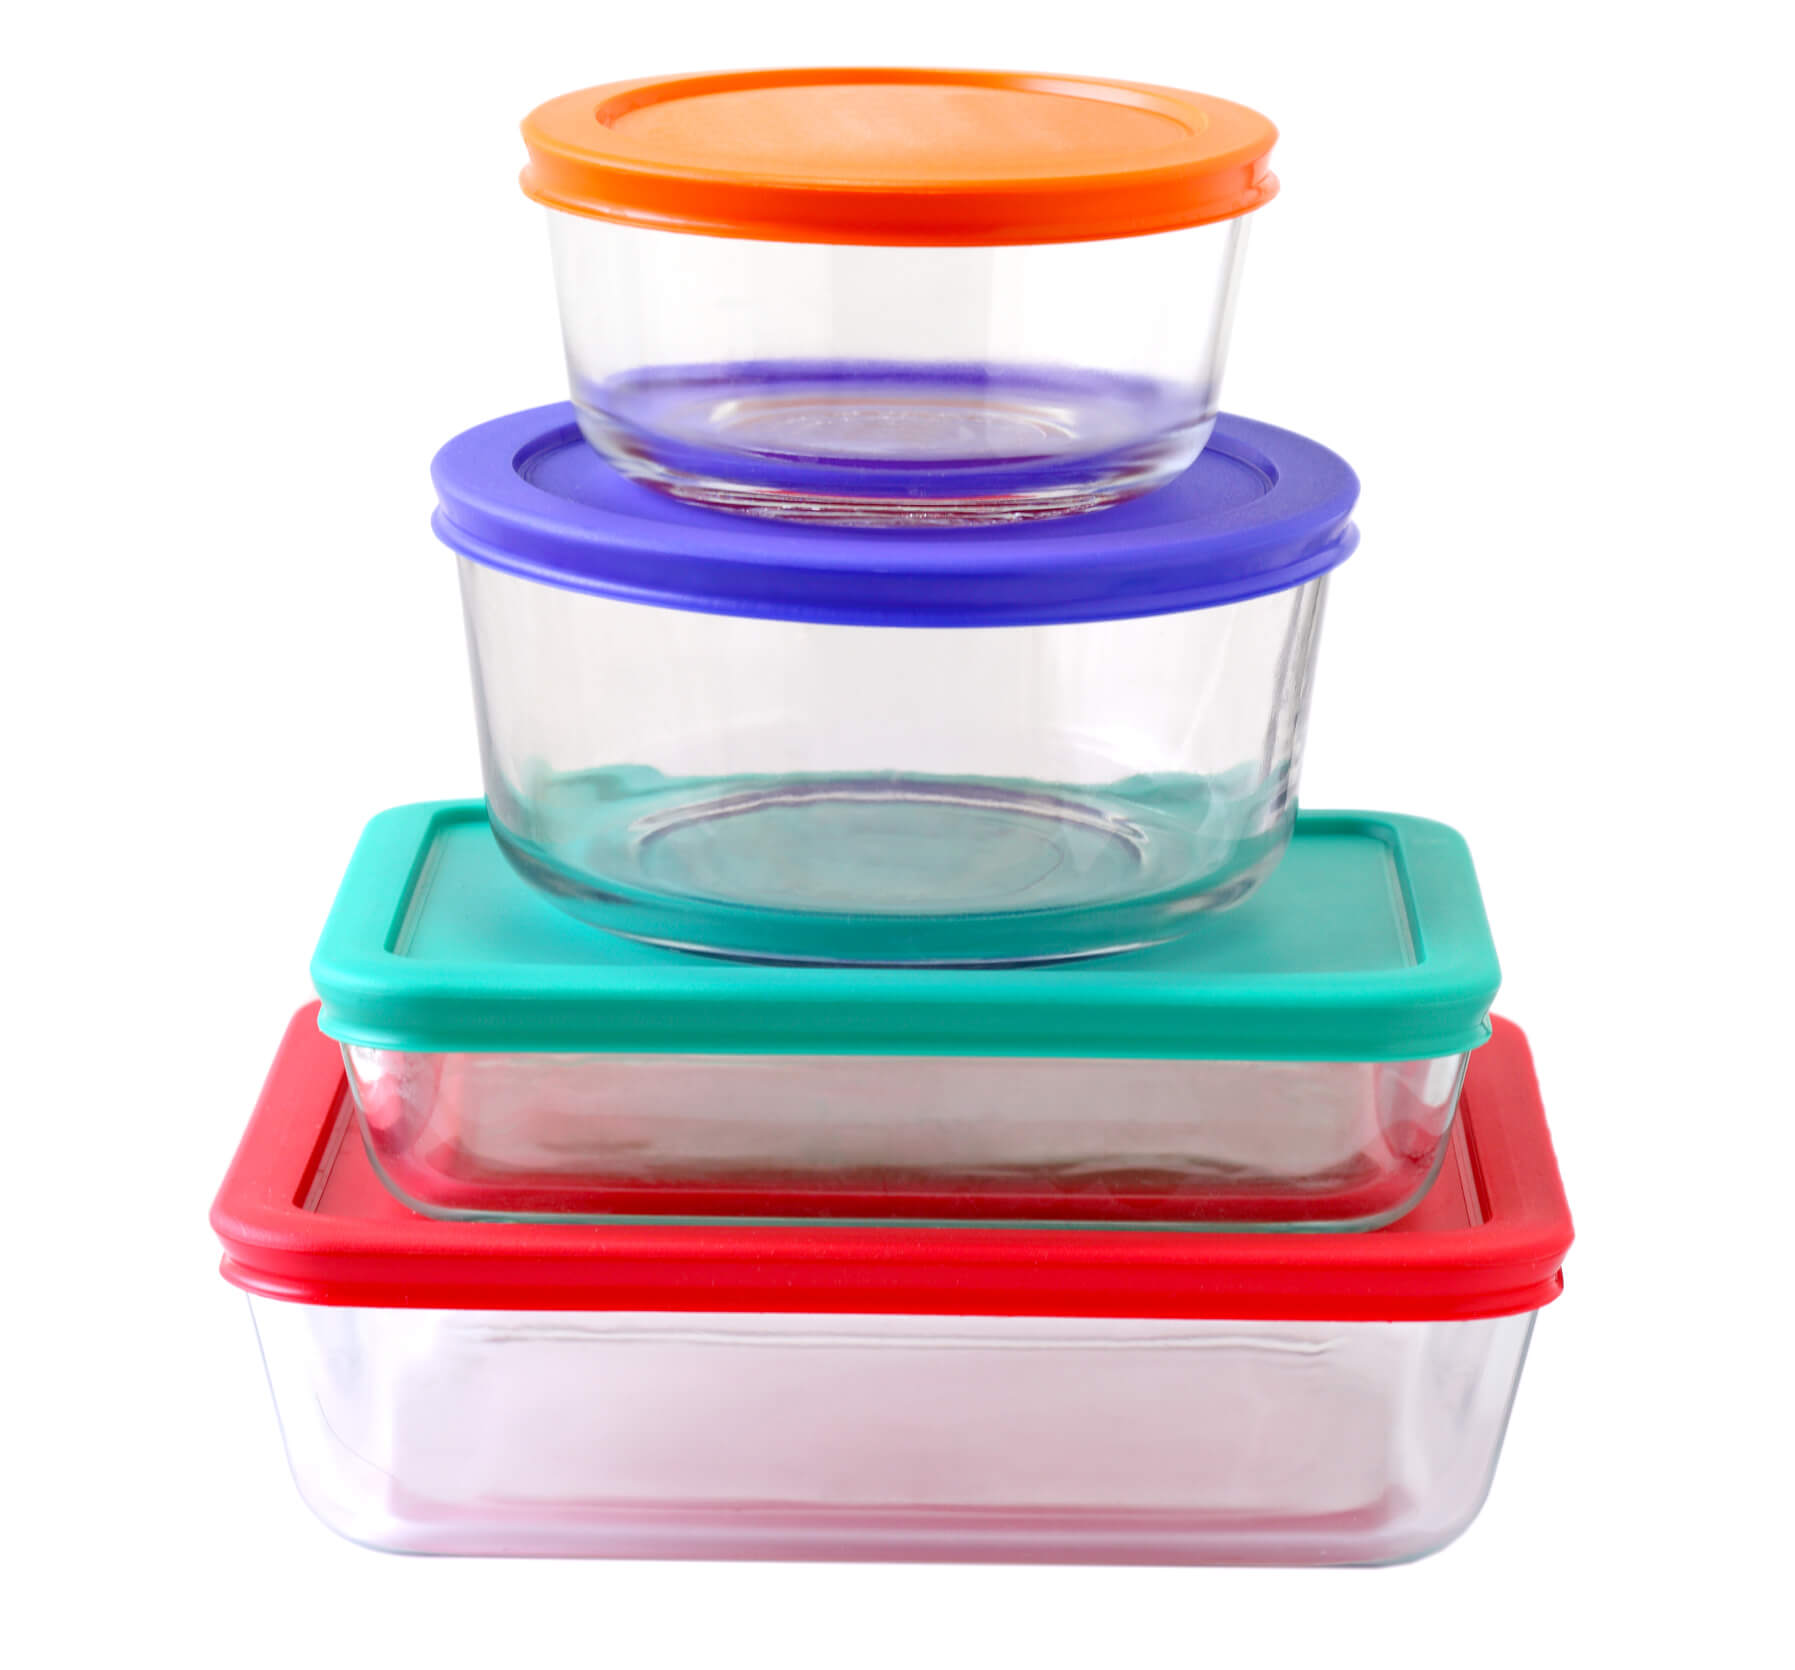 6 Best Choices for Food Storage Containers